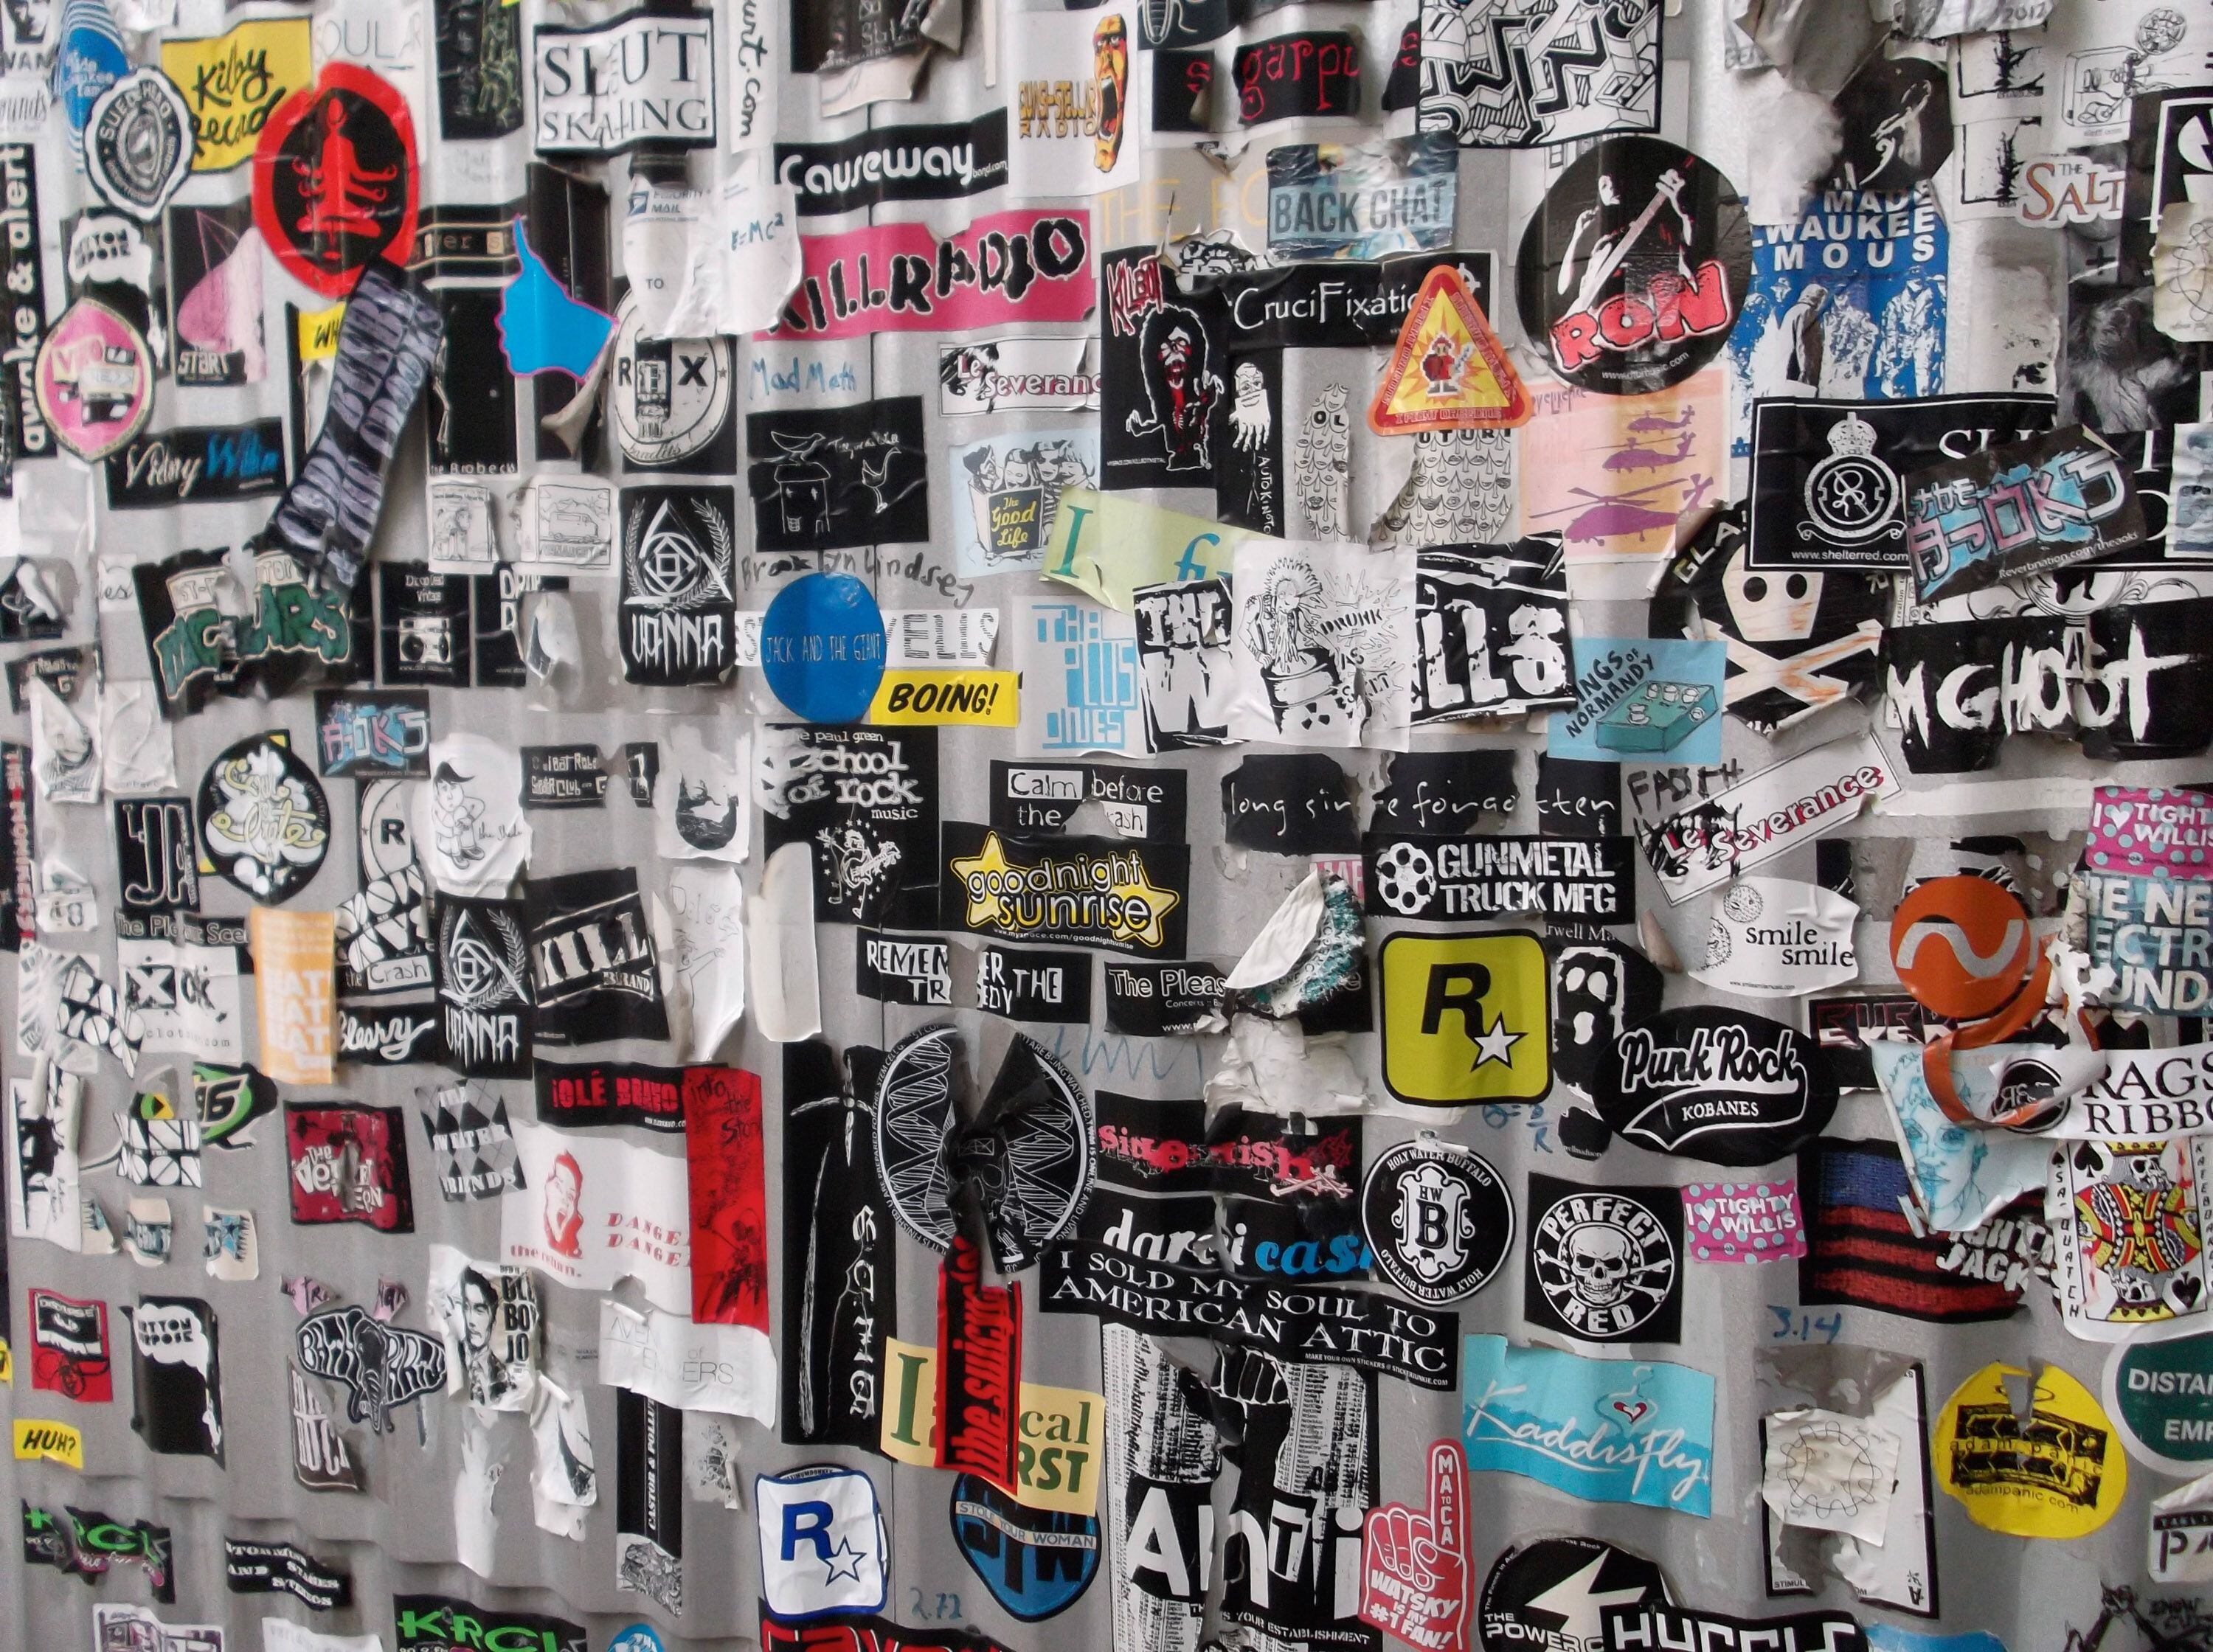 Sean P. Means  |  The Salt Lake Tribune

At Kilby Court, the all-ages Salt Lake City music venue, a wall of stickers shows the many bands that have played there.